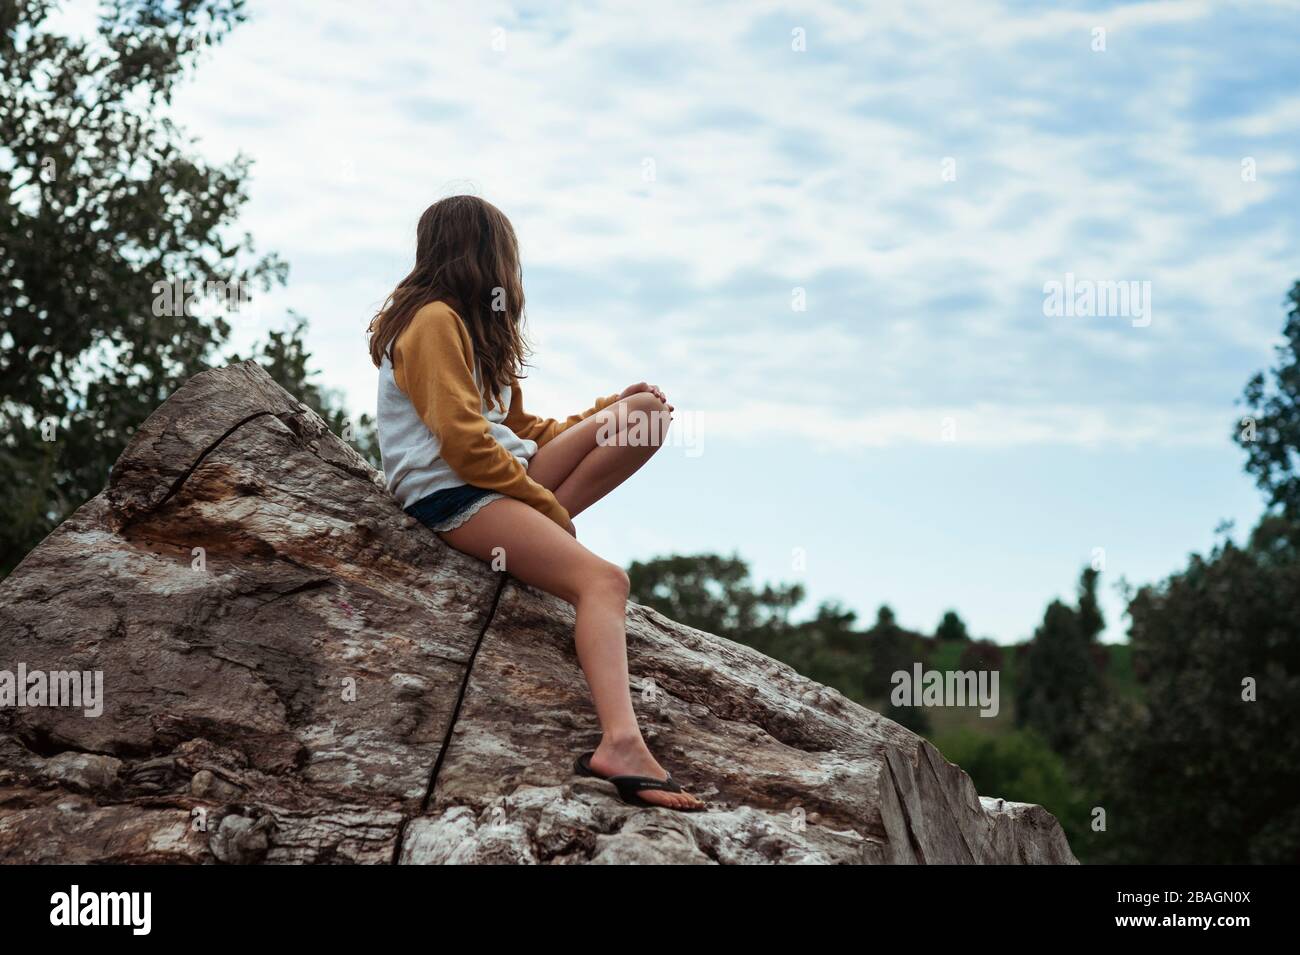 Young girl 10-12 years old looking at clouds while sitting on a log Stock Photo